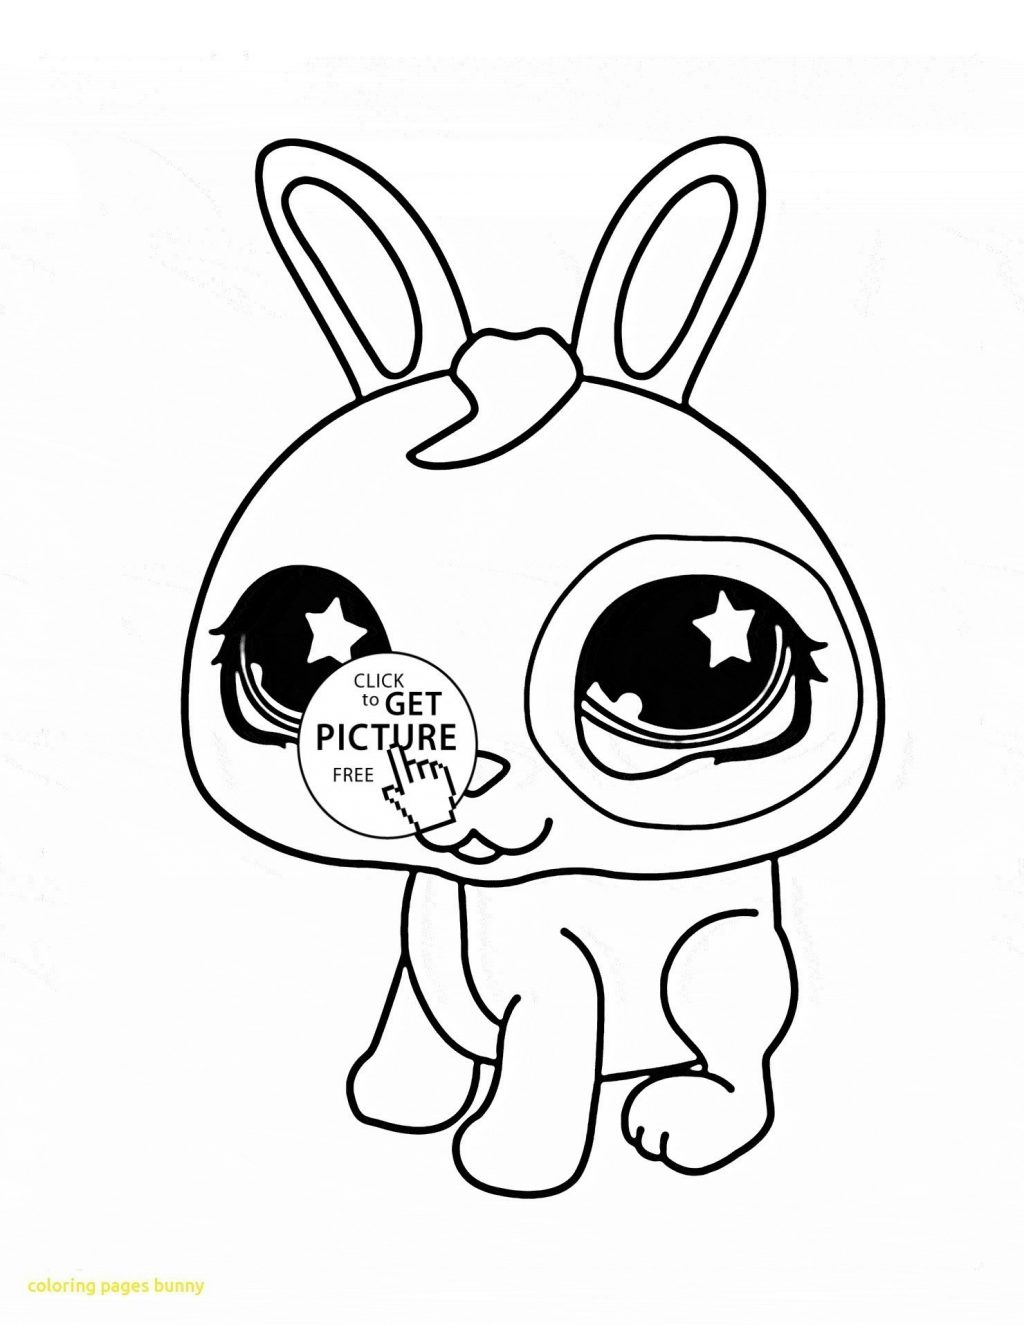 Free Rabbit Coloring Pages Coloring Page Printable Rabbit Coloring Pages For Kids Page